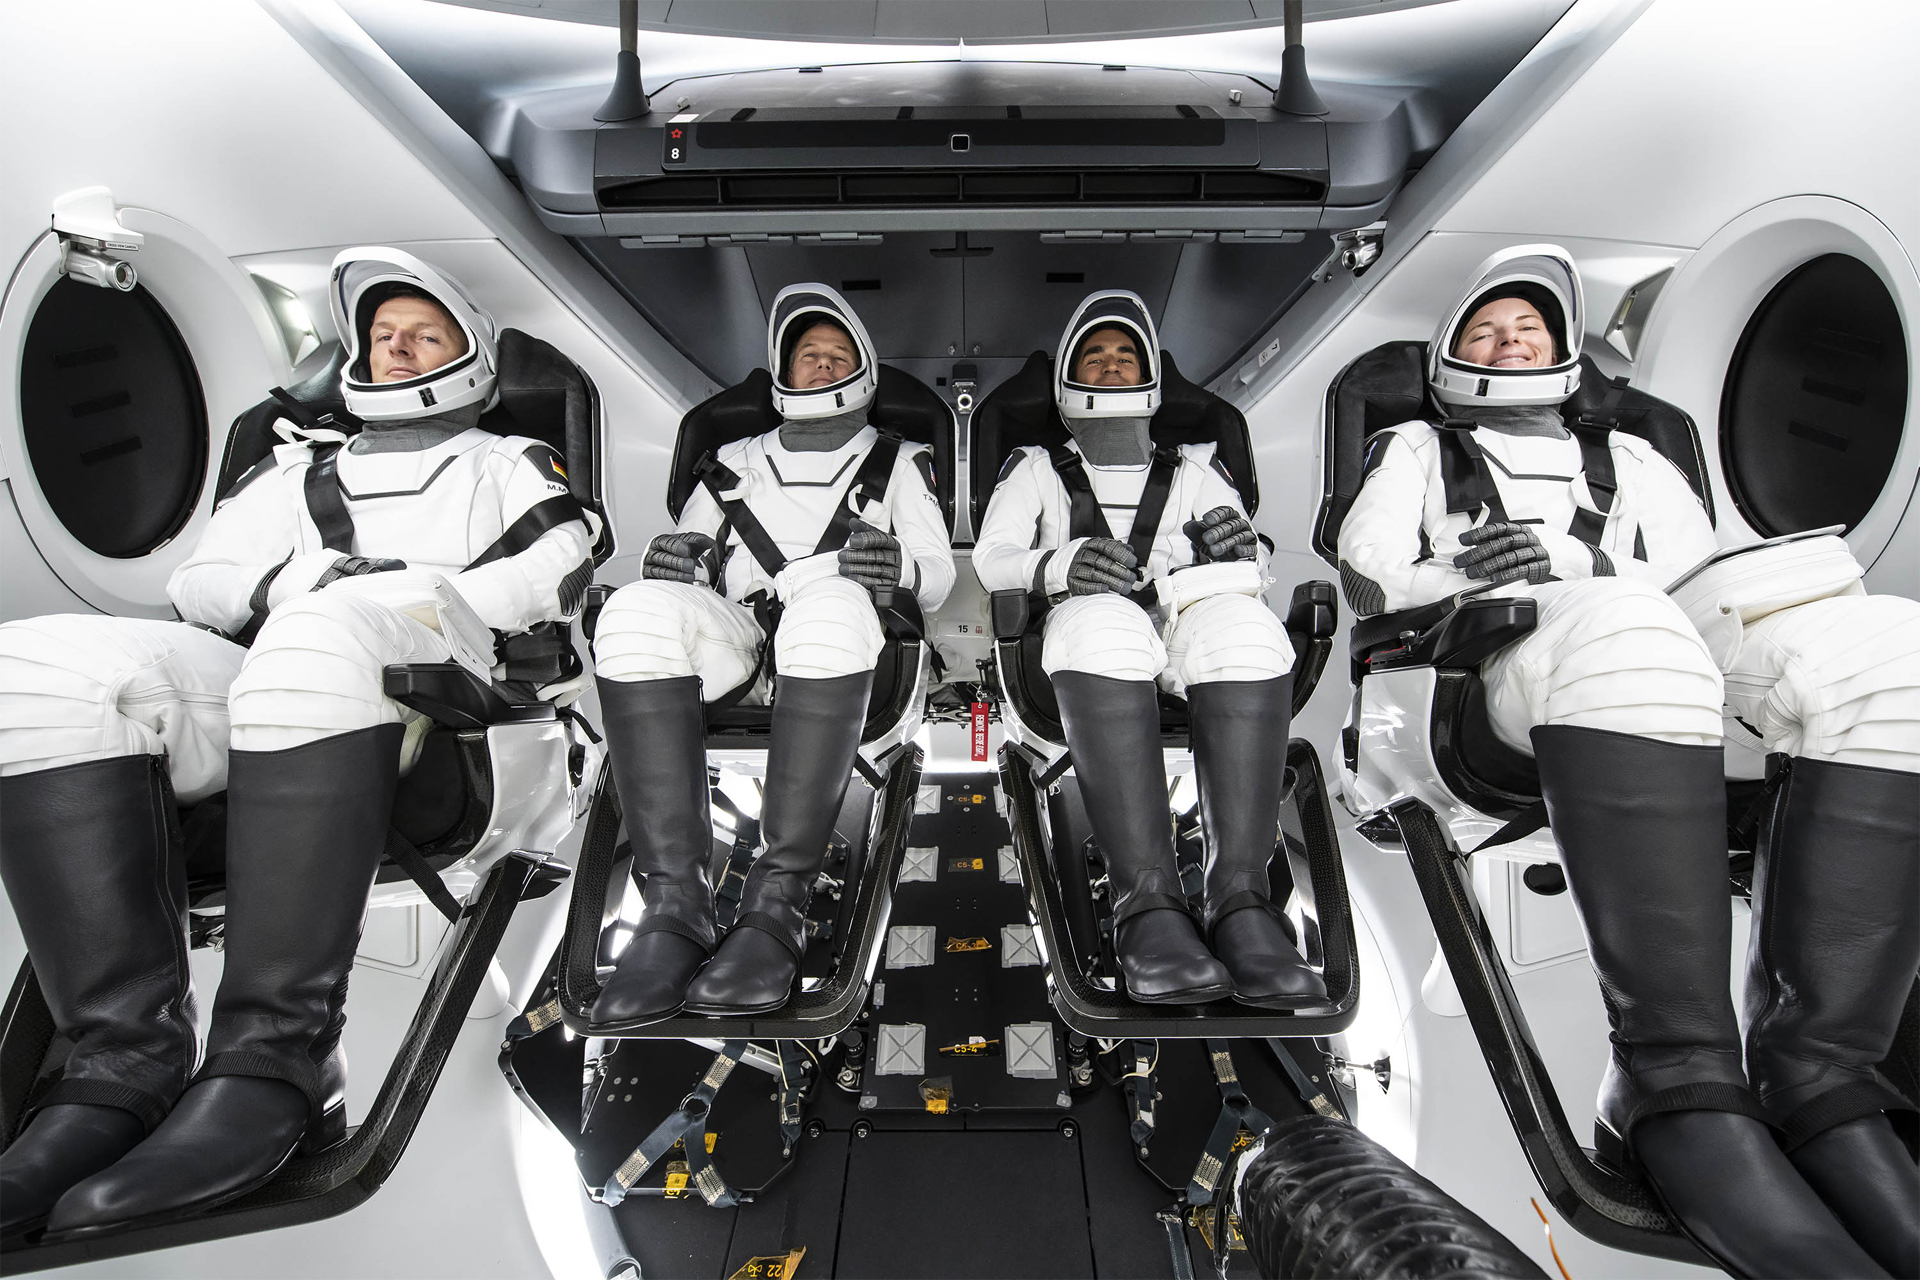 The Crew-3 astronauts pose for a group photo inside SpaceX's Crew Dragon spacecraft. They are: (from left) ESA astronaut Matthias Maurer, mission specialist; NASA astronauts Tom Marshburn, pilot; Raja Chari, commander; and Kayla Barron, mission specialist.